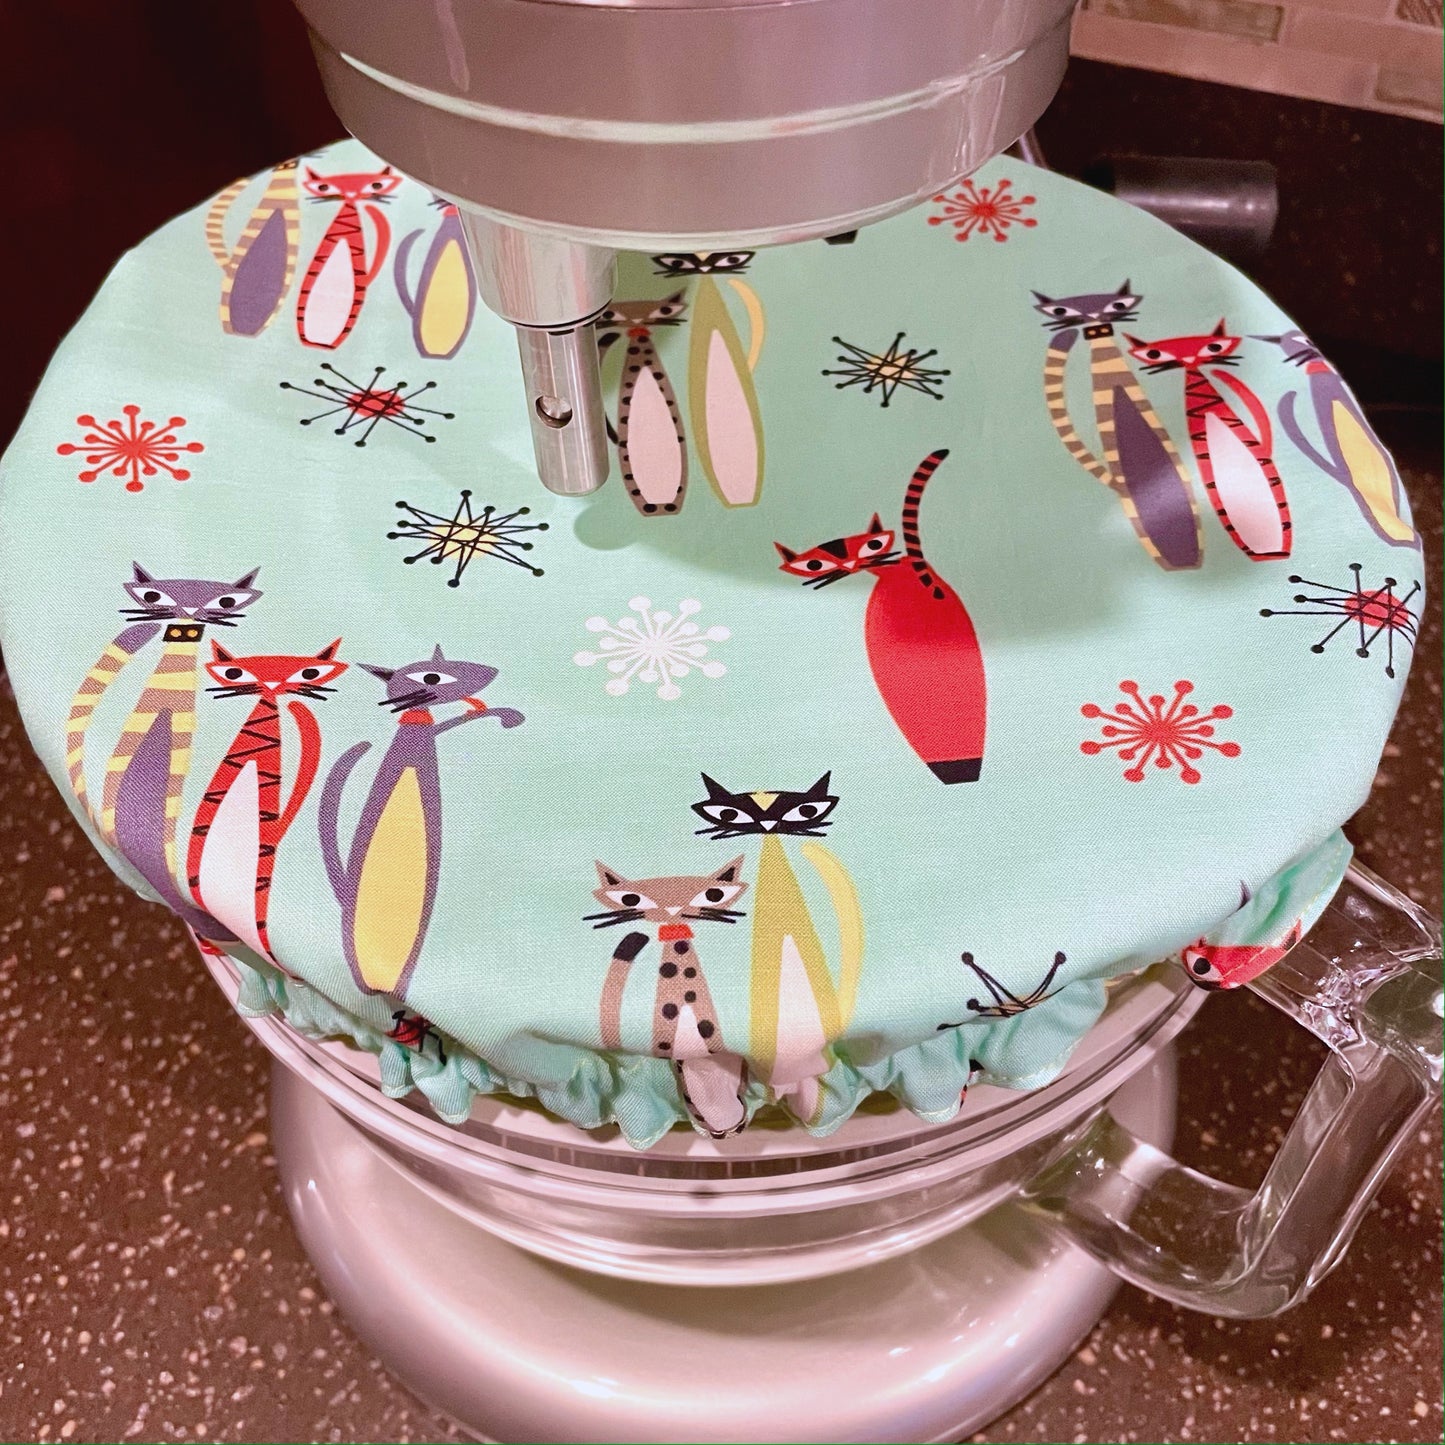 Stand Mixer Bowl Covers - Atomic Tabby Cats